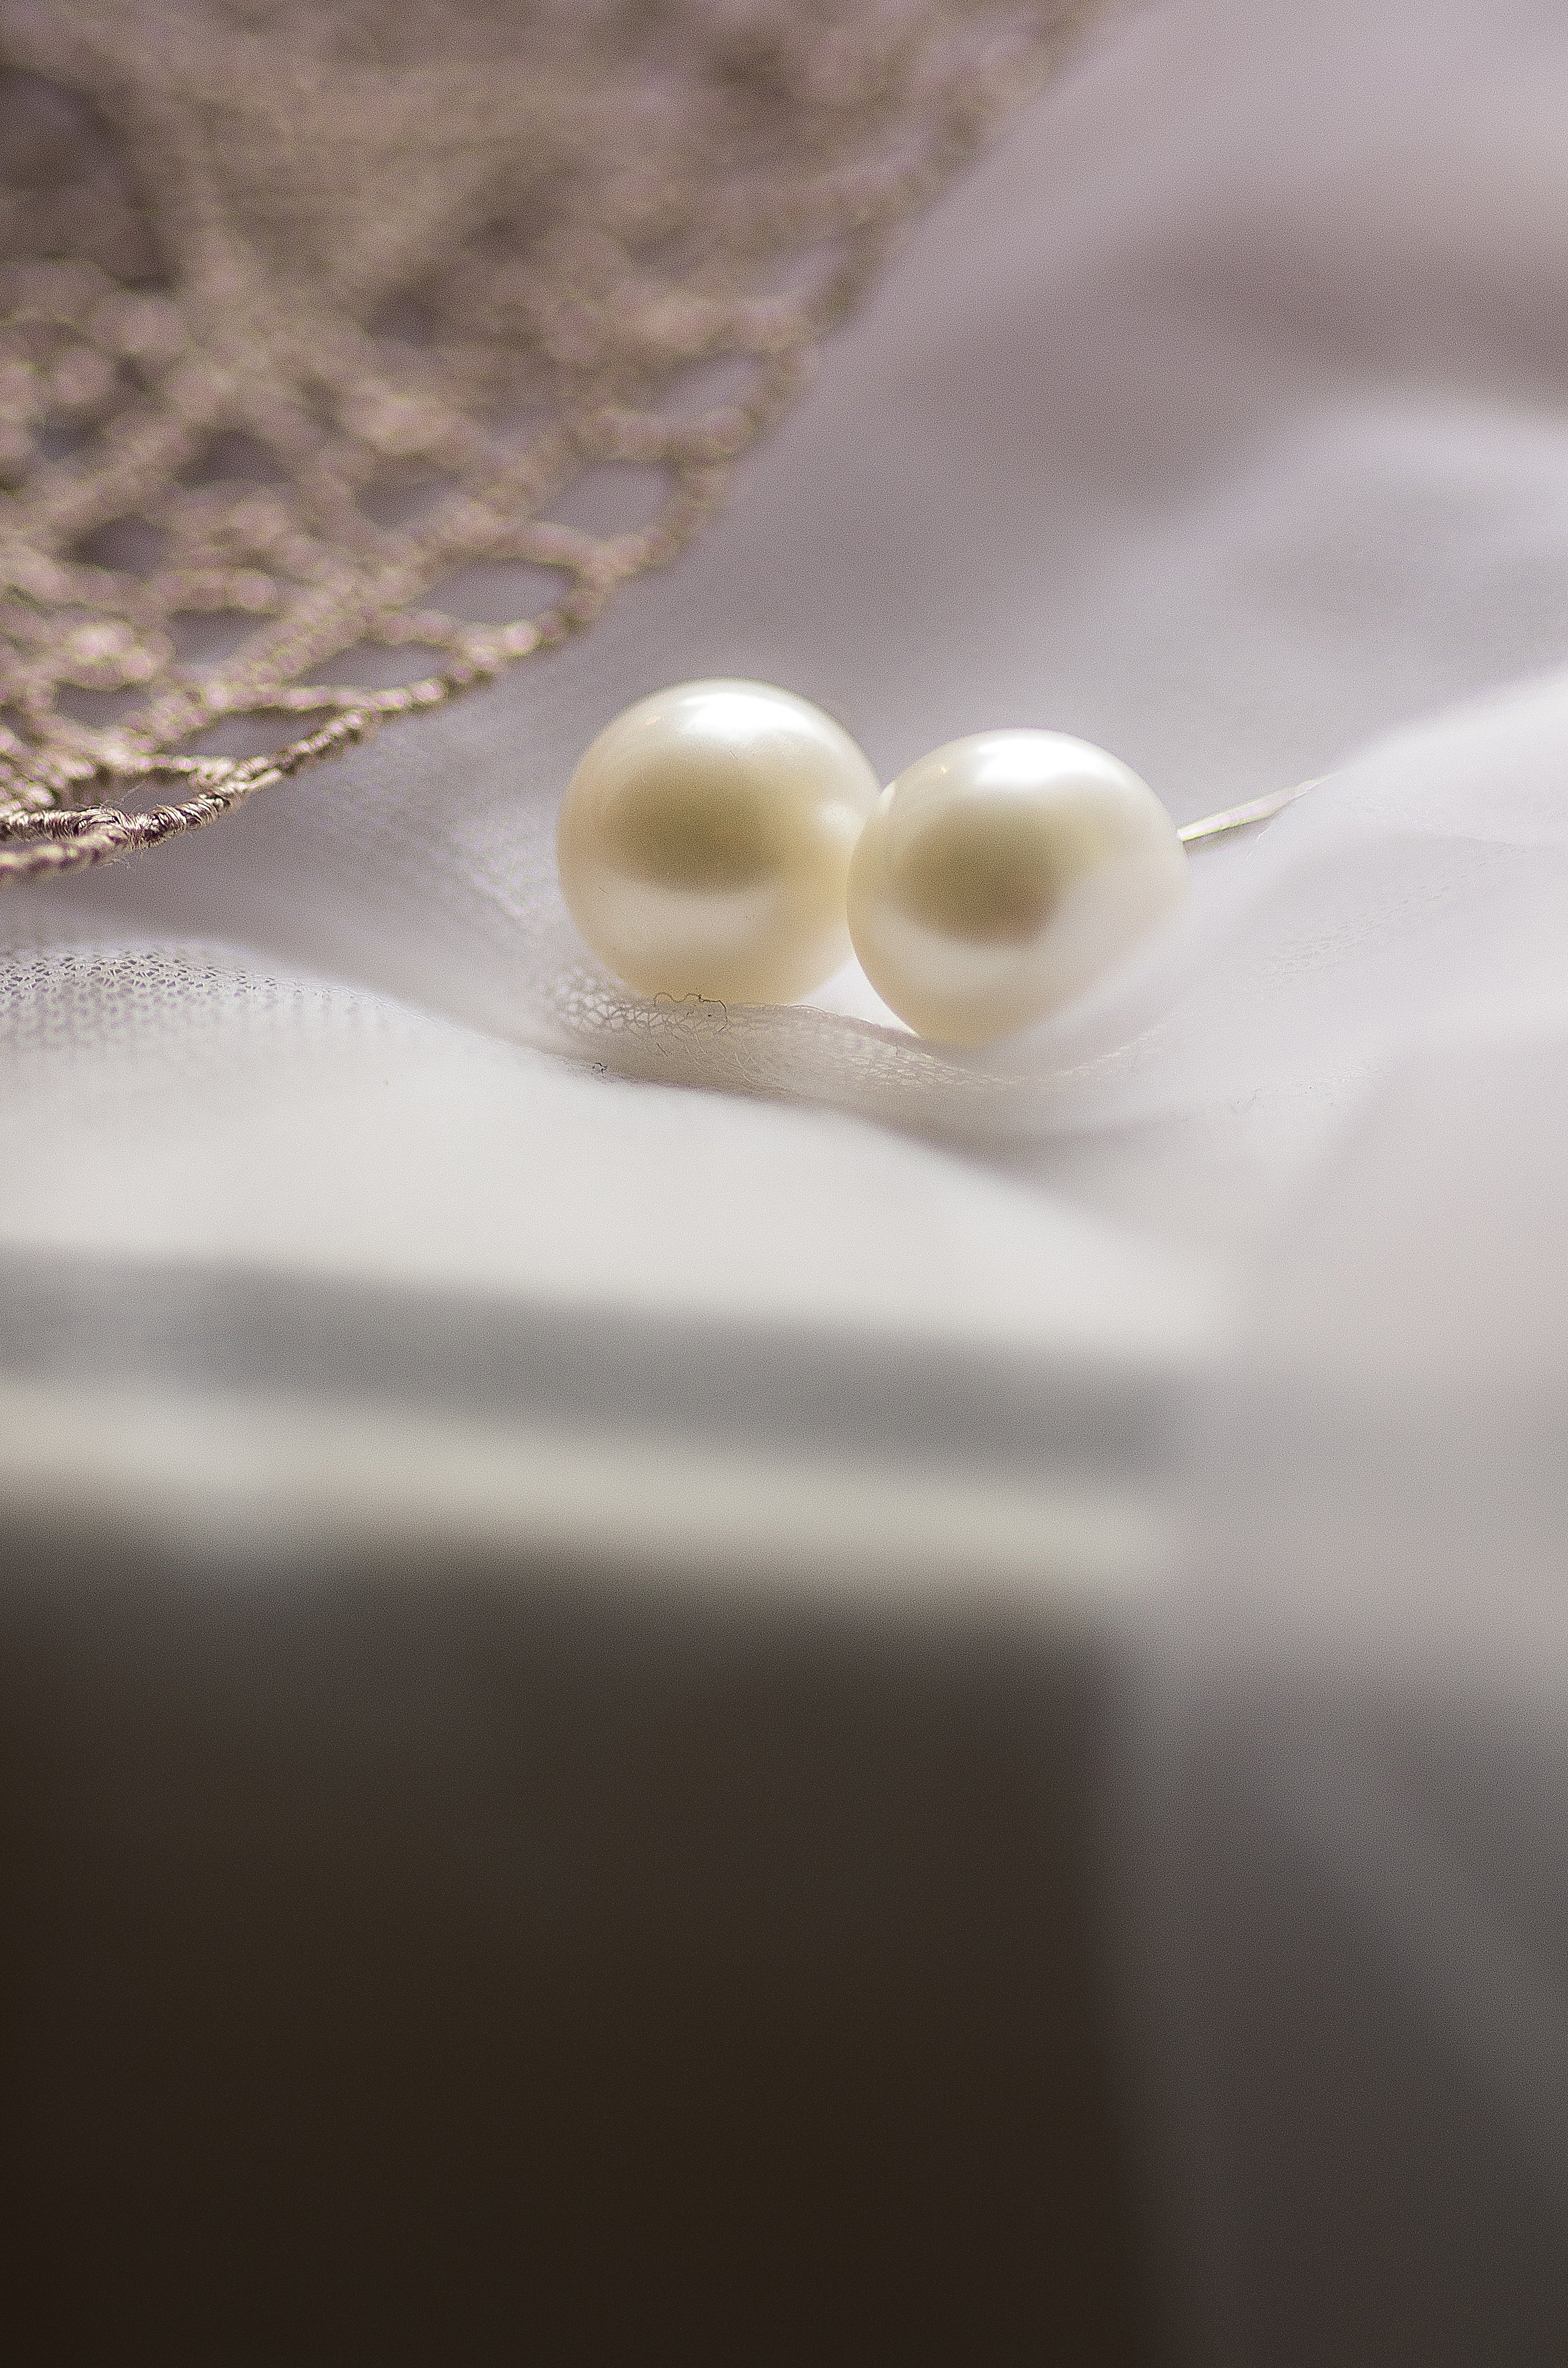 Pearl Earrings in soft light captured by Let There Be Light Photography